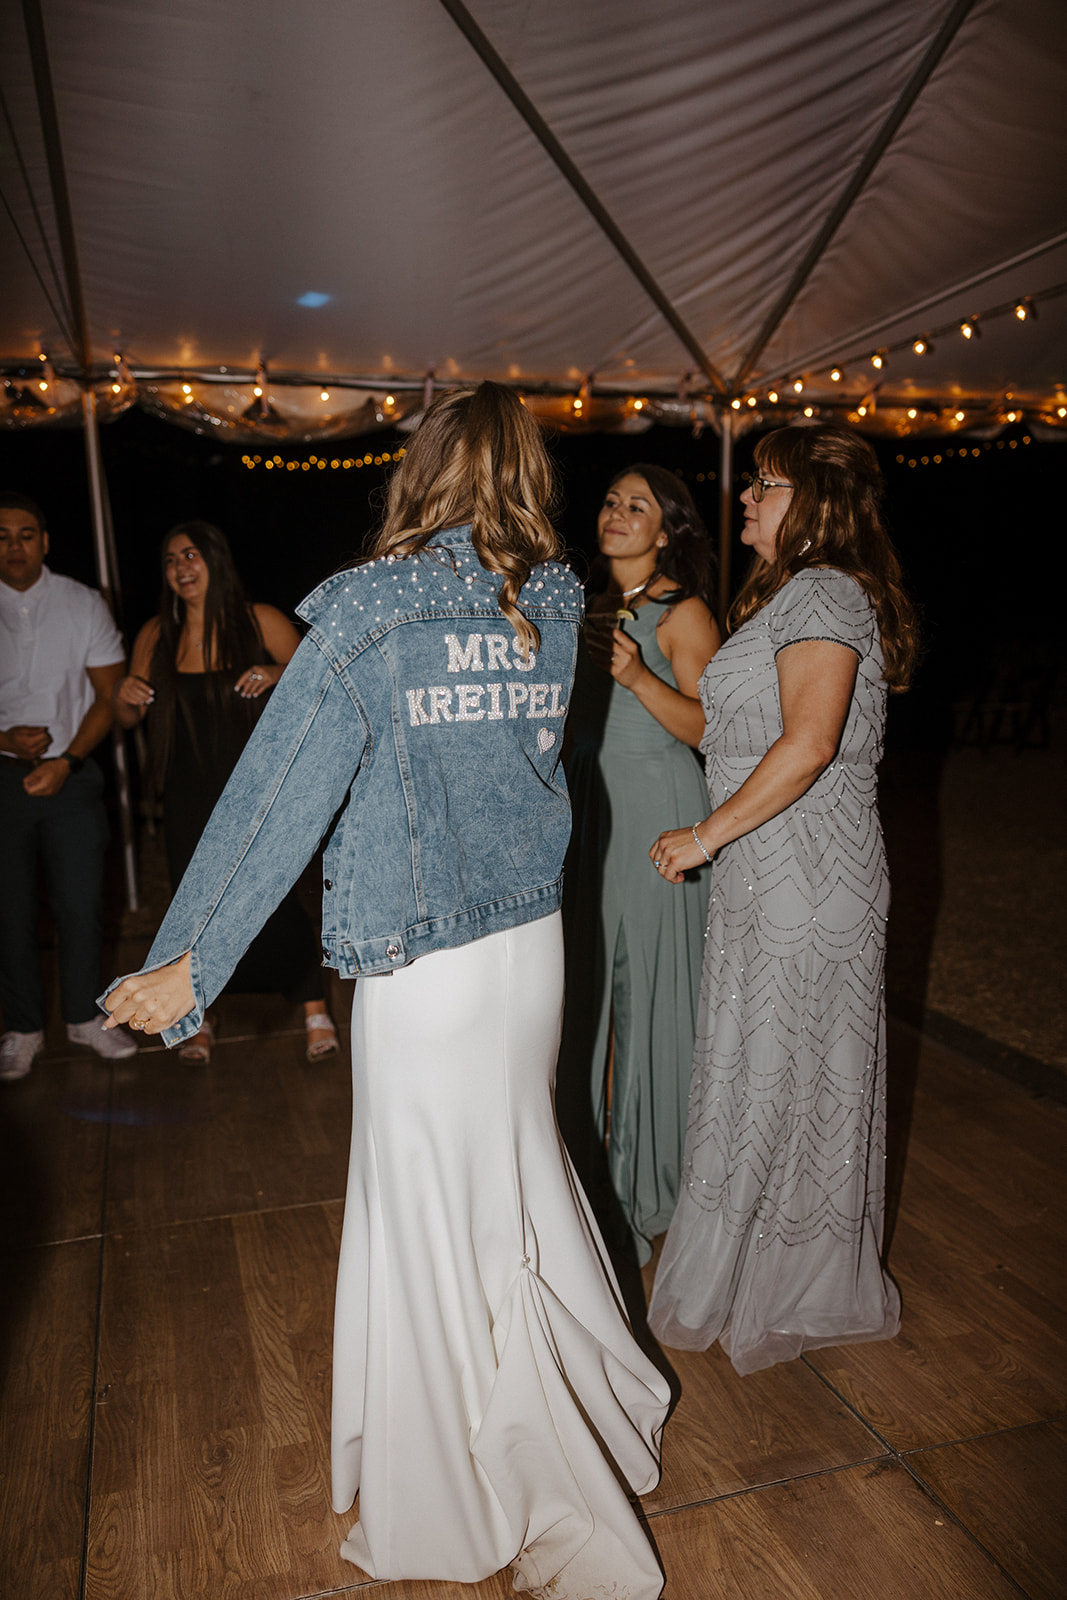 bride wearing a denim jacket with new last name on the back 